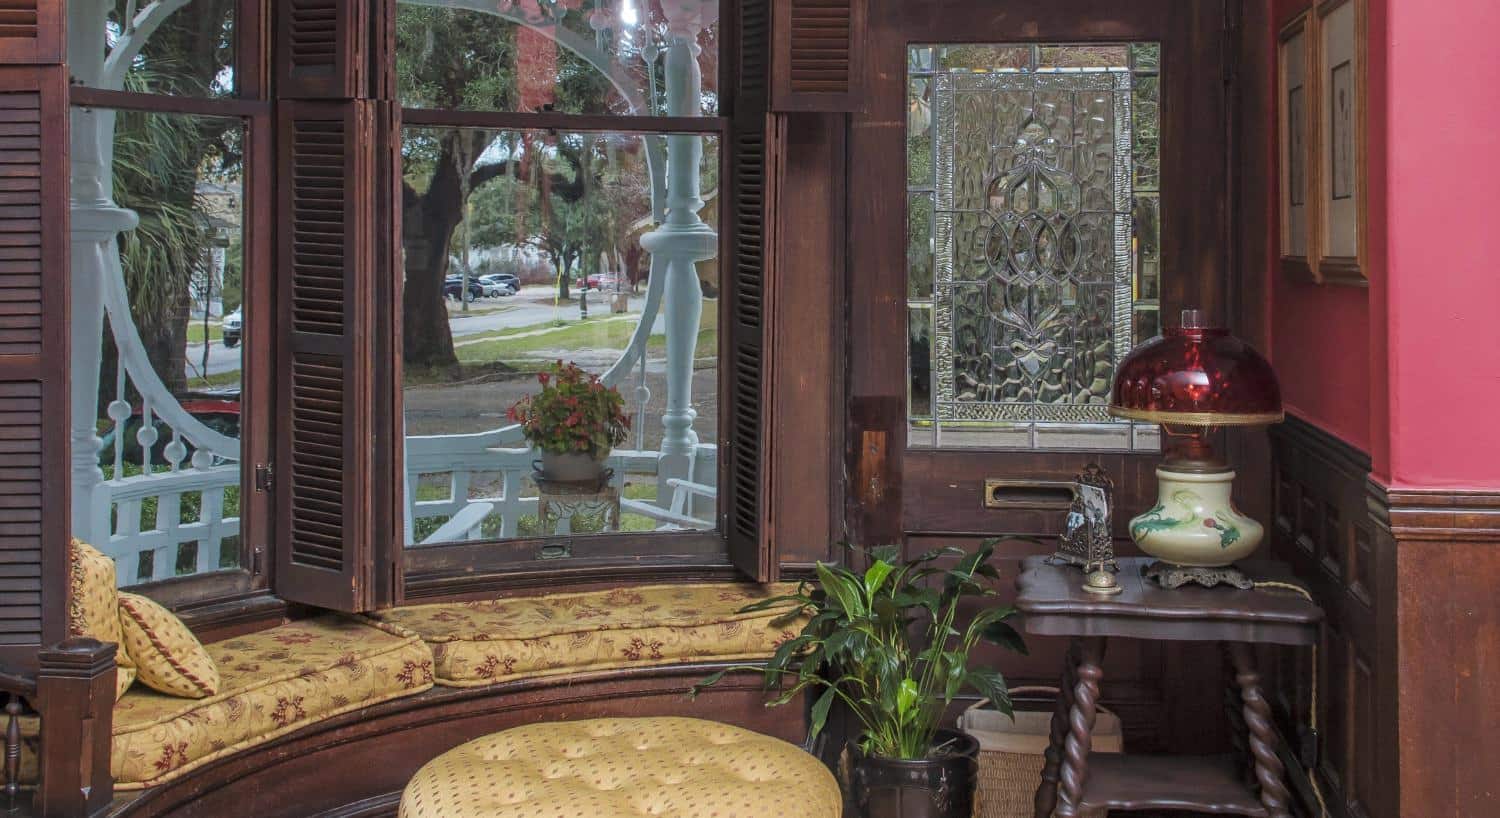 Large picture window with dark brown wooden shutters and gold and burgundy floral upholstered cushions